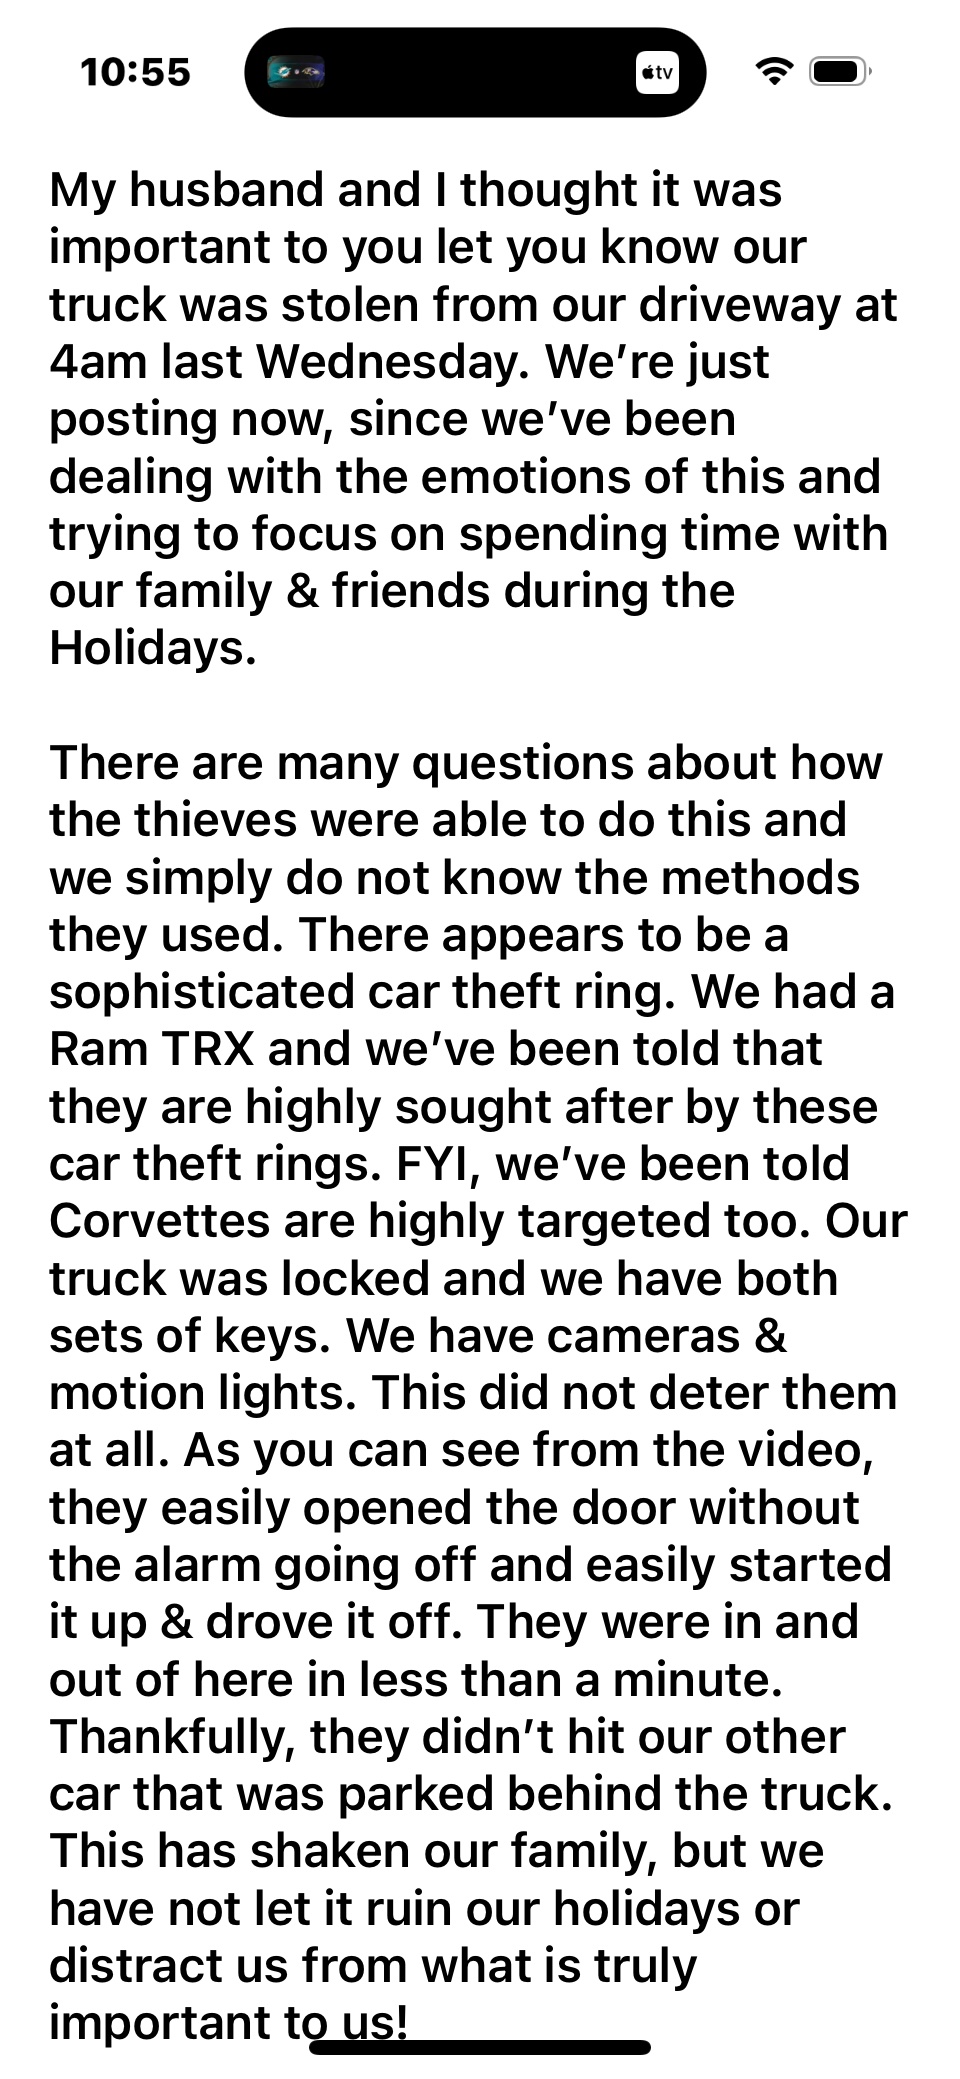 Ford Bronco Looking for kill switch. Two Ram TRX's stolen in my neighborhood in the last week! screen-shot-2015-05-29-at-7-56-11-pm